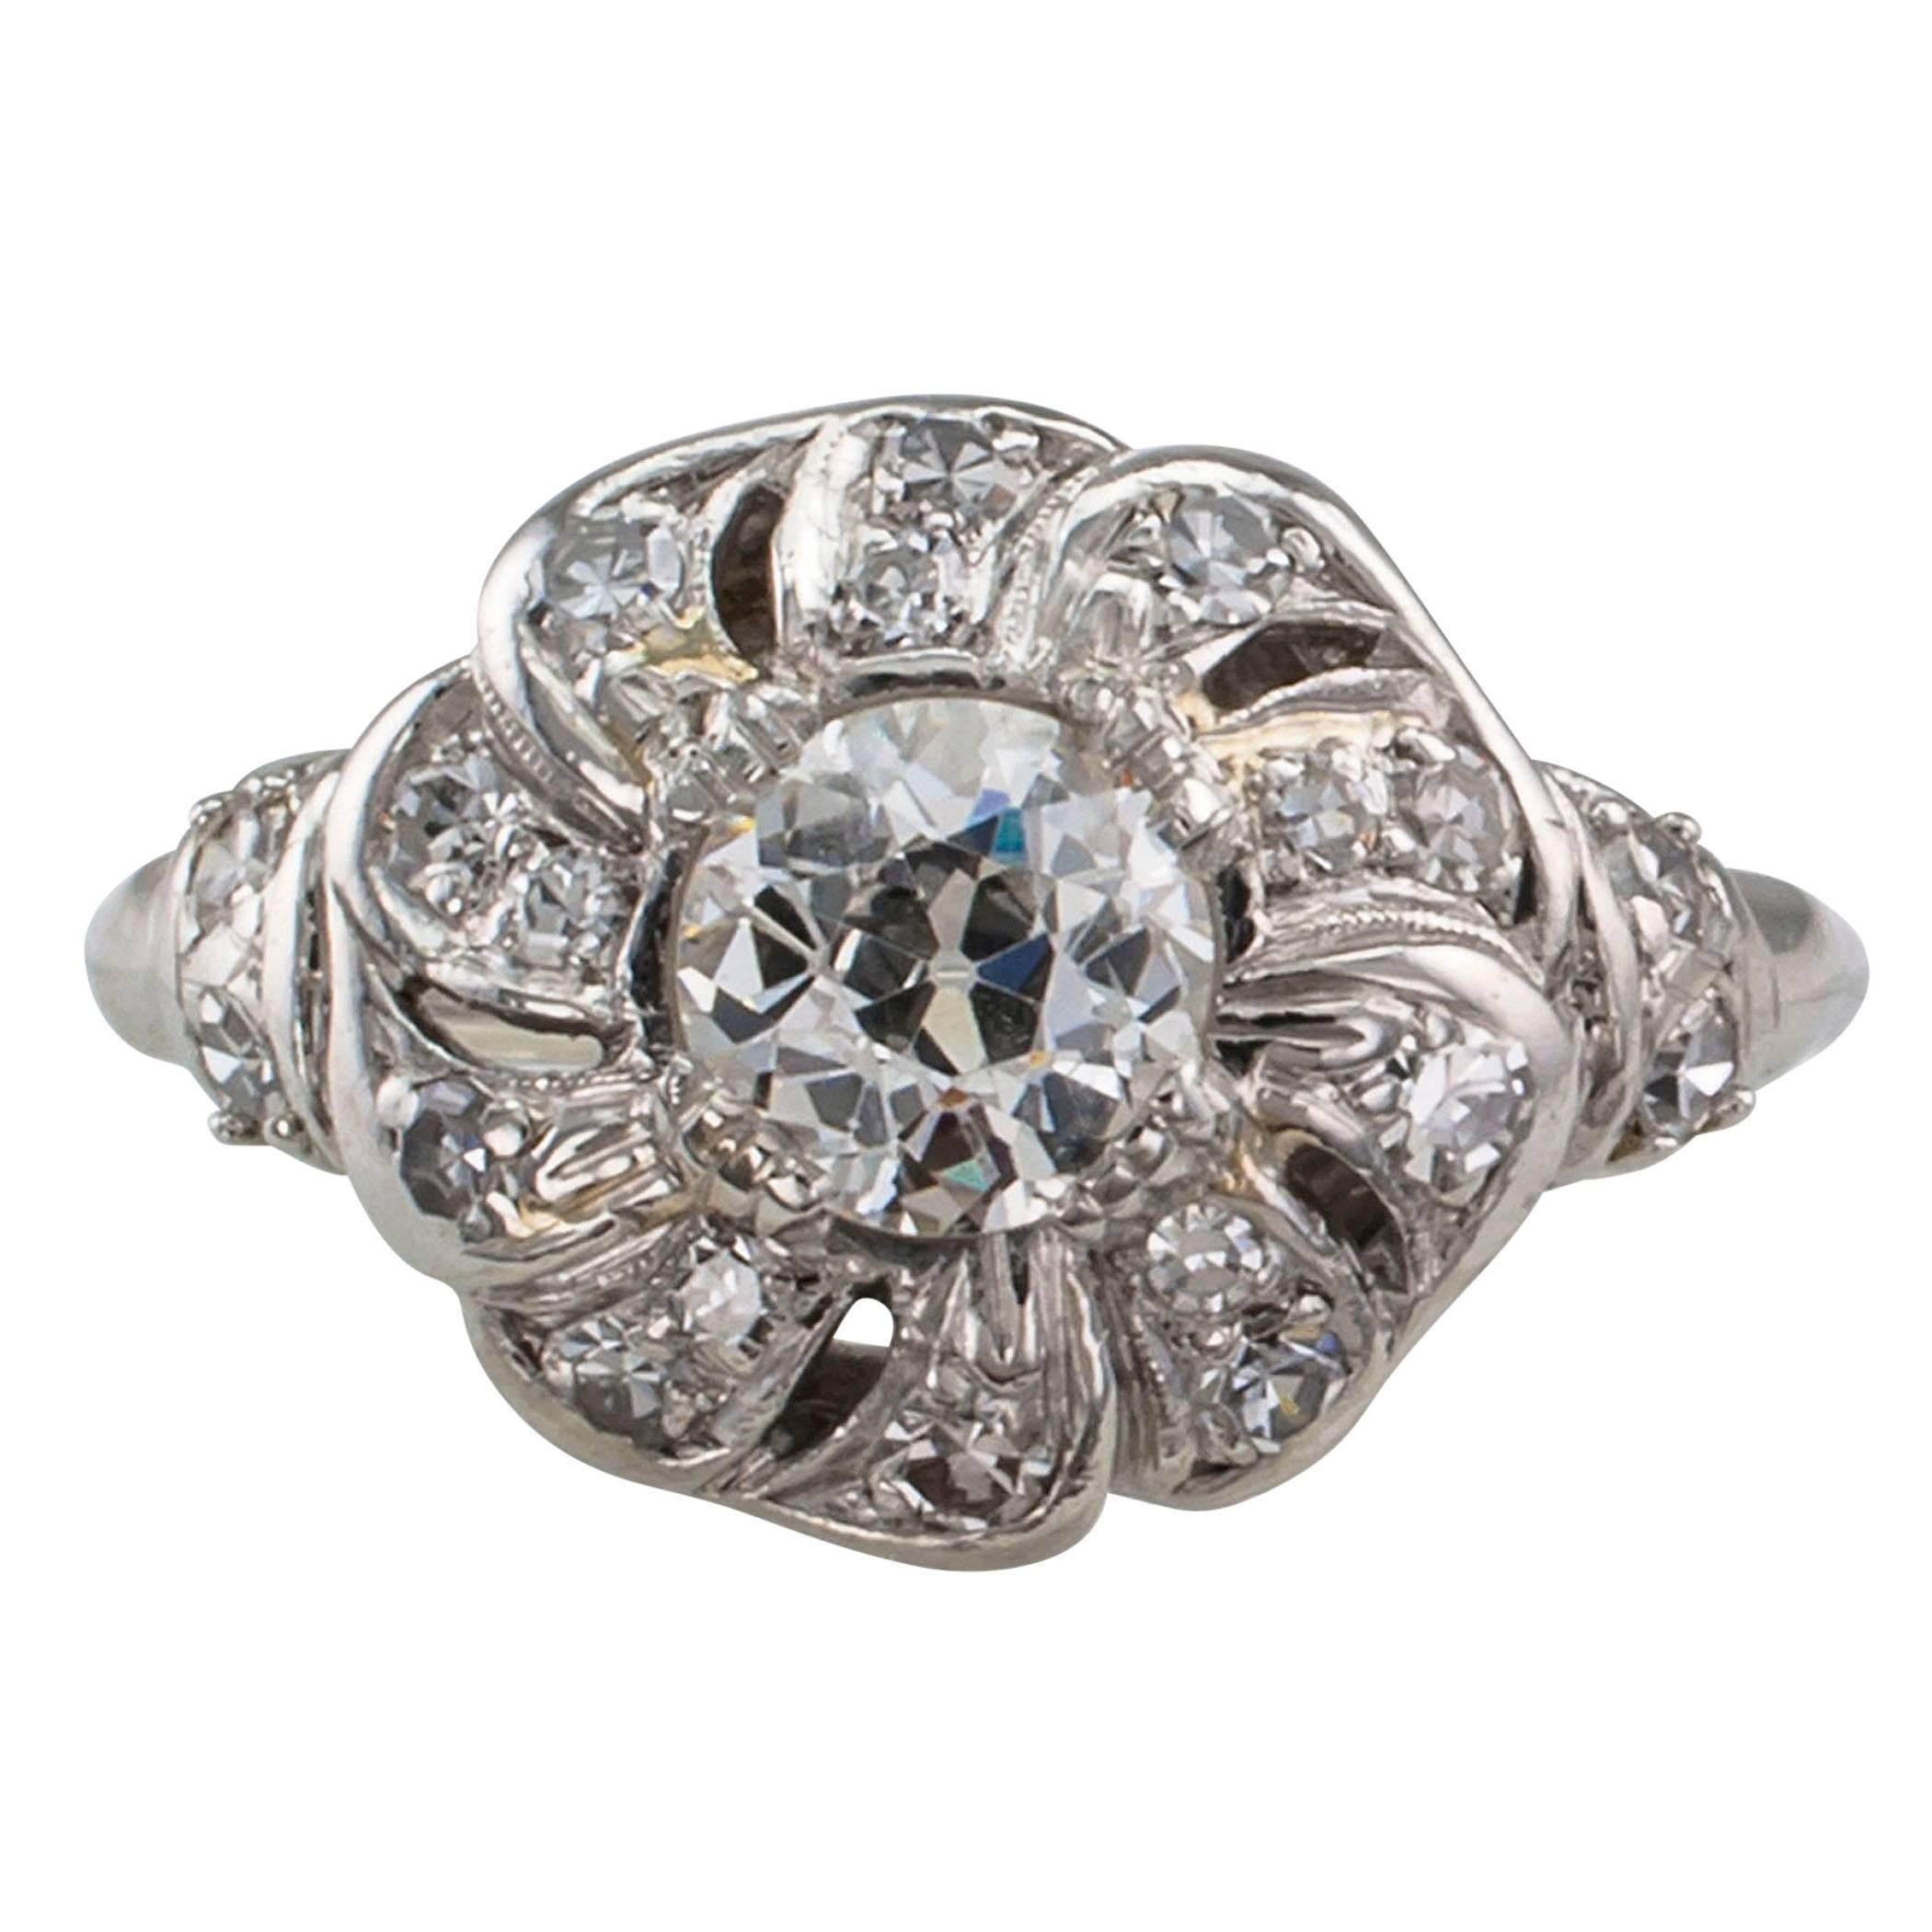 Late Art Deco 1930s diamond and platinum engagement ring. Designed as a flower centering an old European-cut diamond weighing approximately 0.60 carat, approximately I - J color and SI clarity, surrounded by petals to the shoulders set with smaller